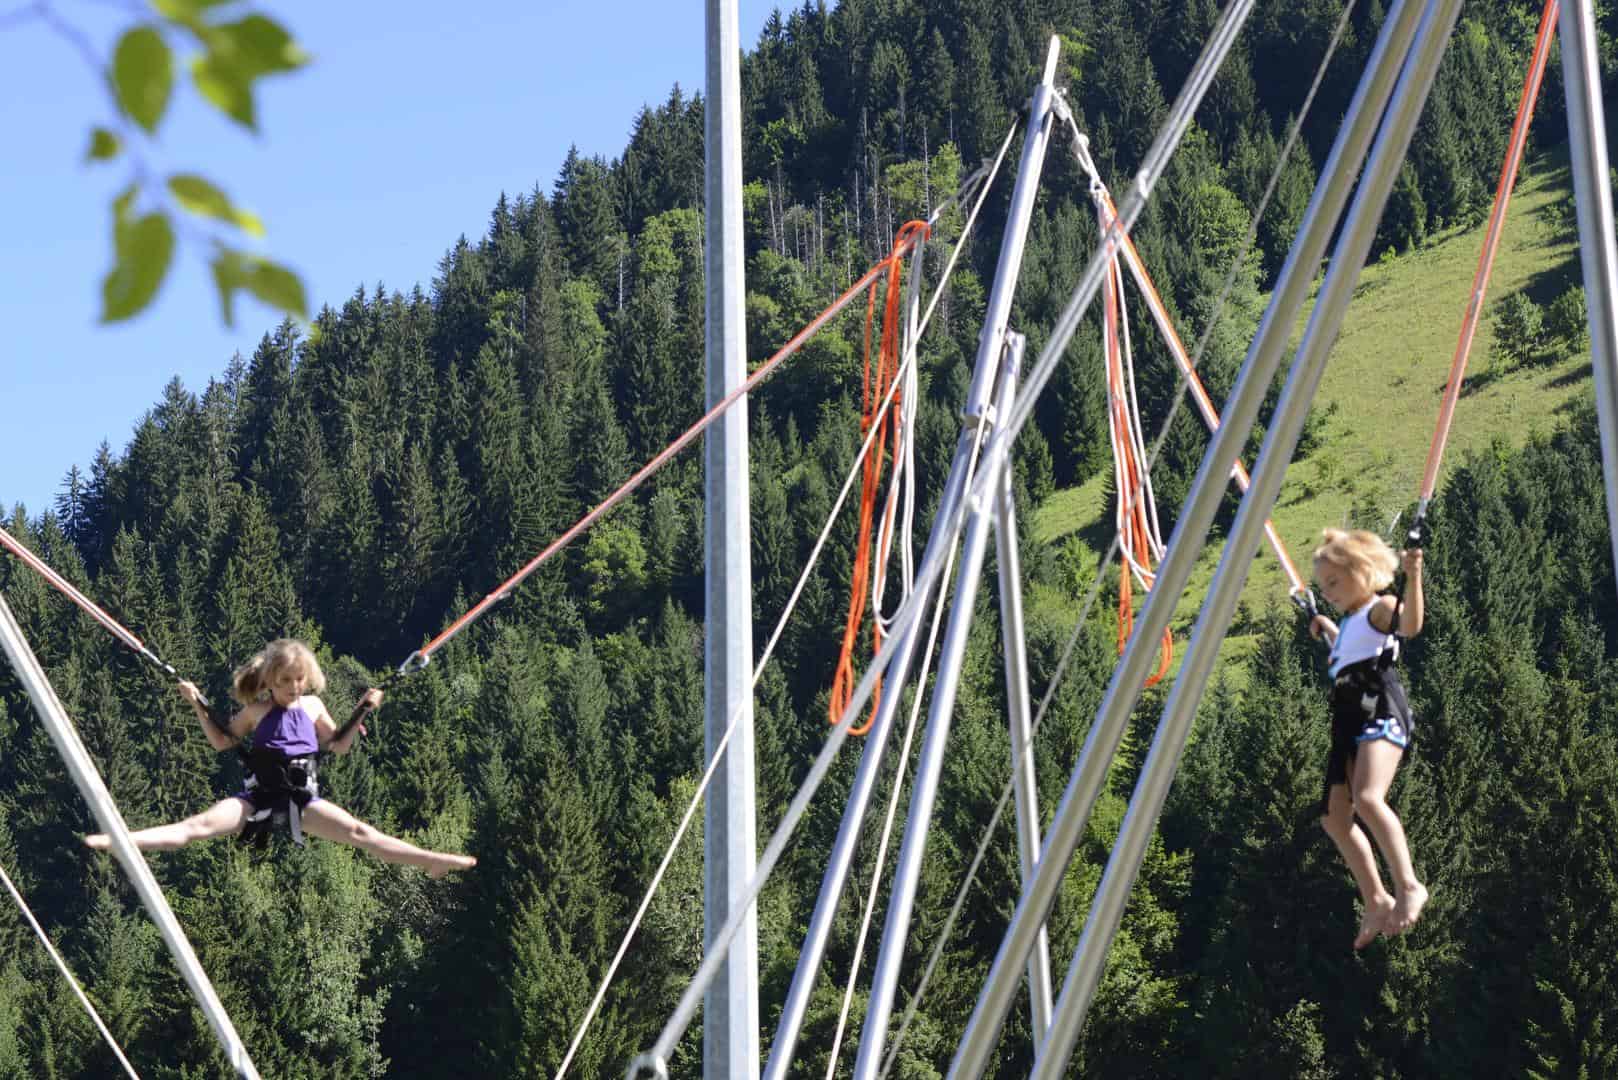 Two little girls try out the bungee trampoline in front of a mountain slope